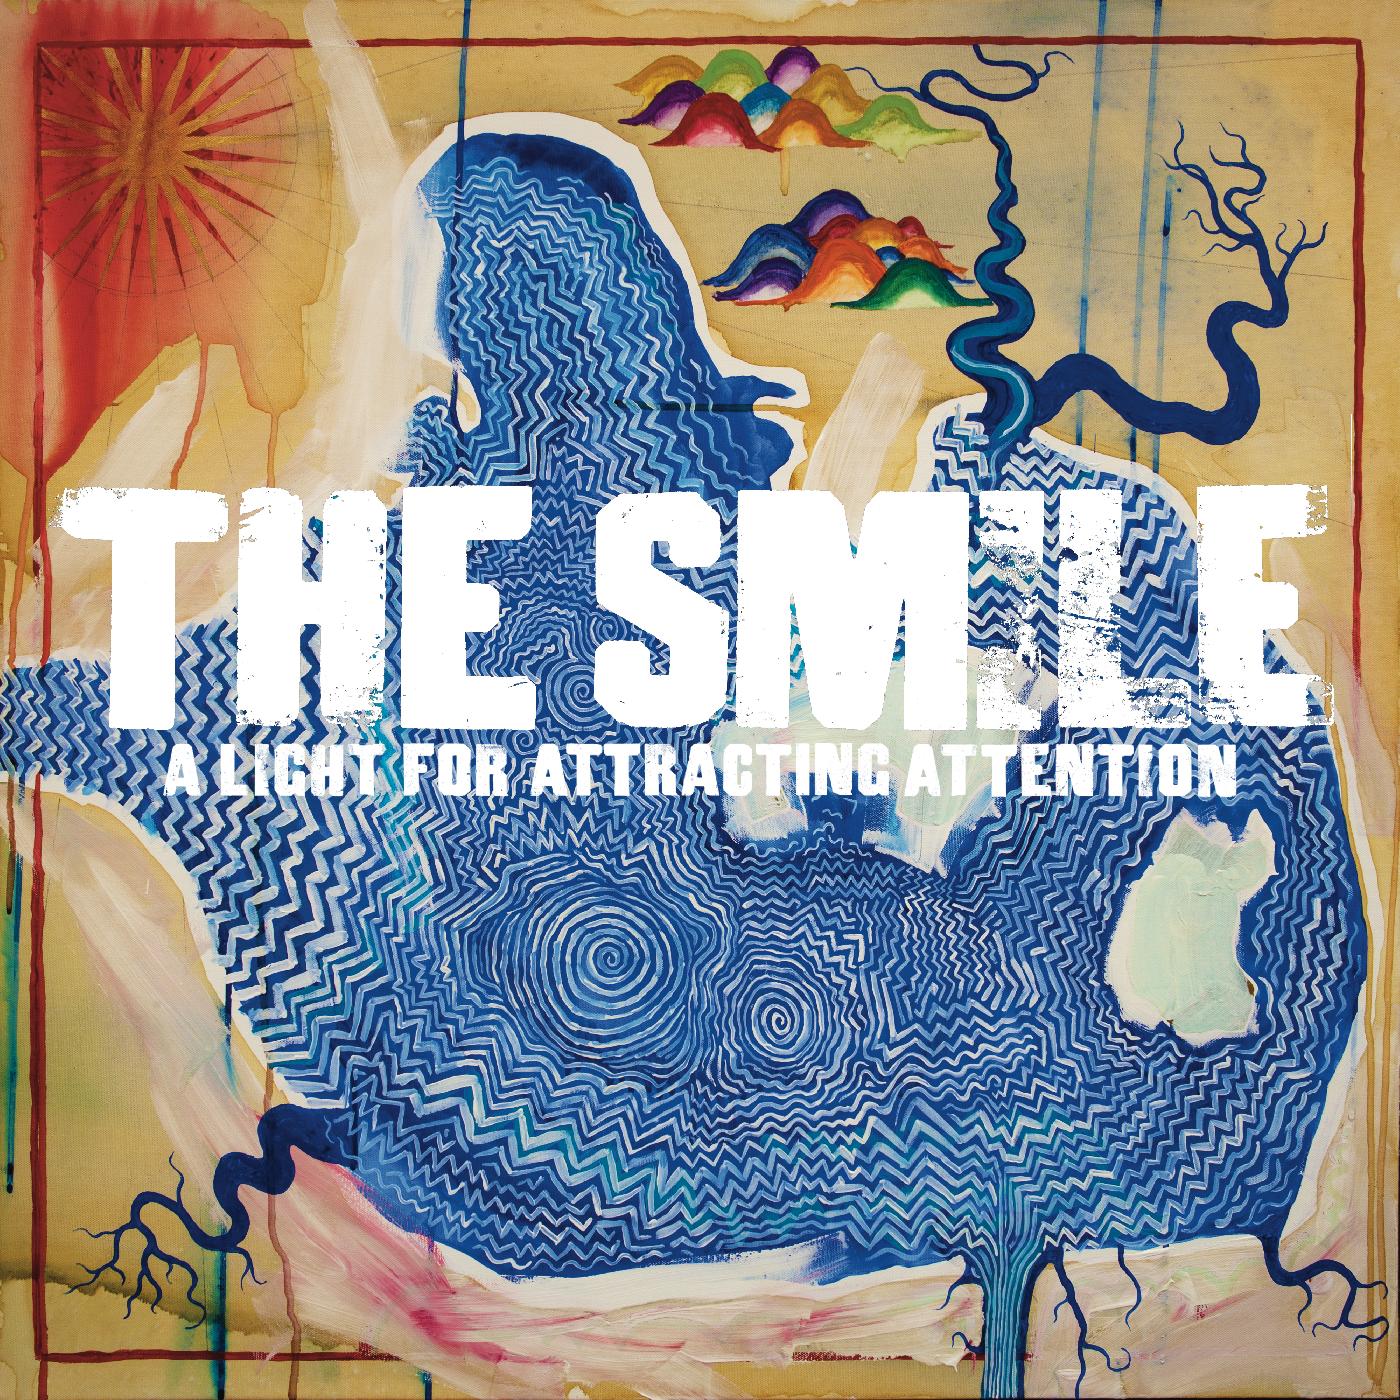 The Smile | A Light for Attracting Attention | Indie & Alternative